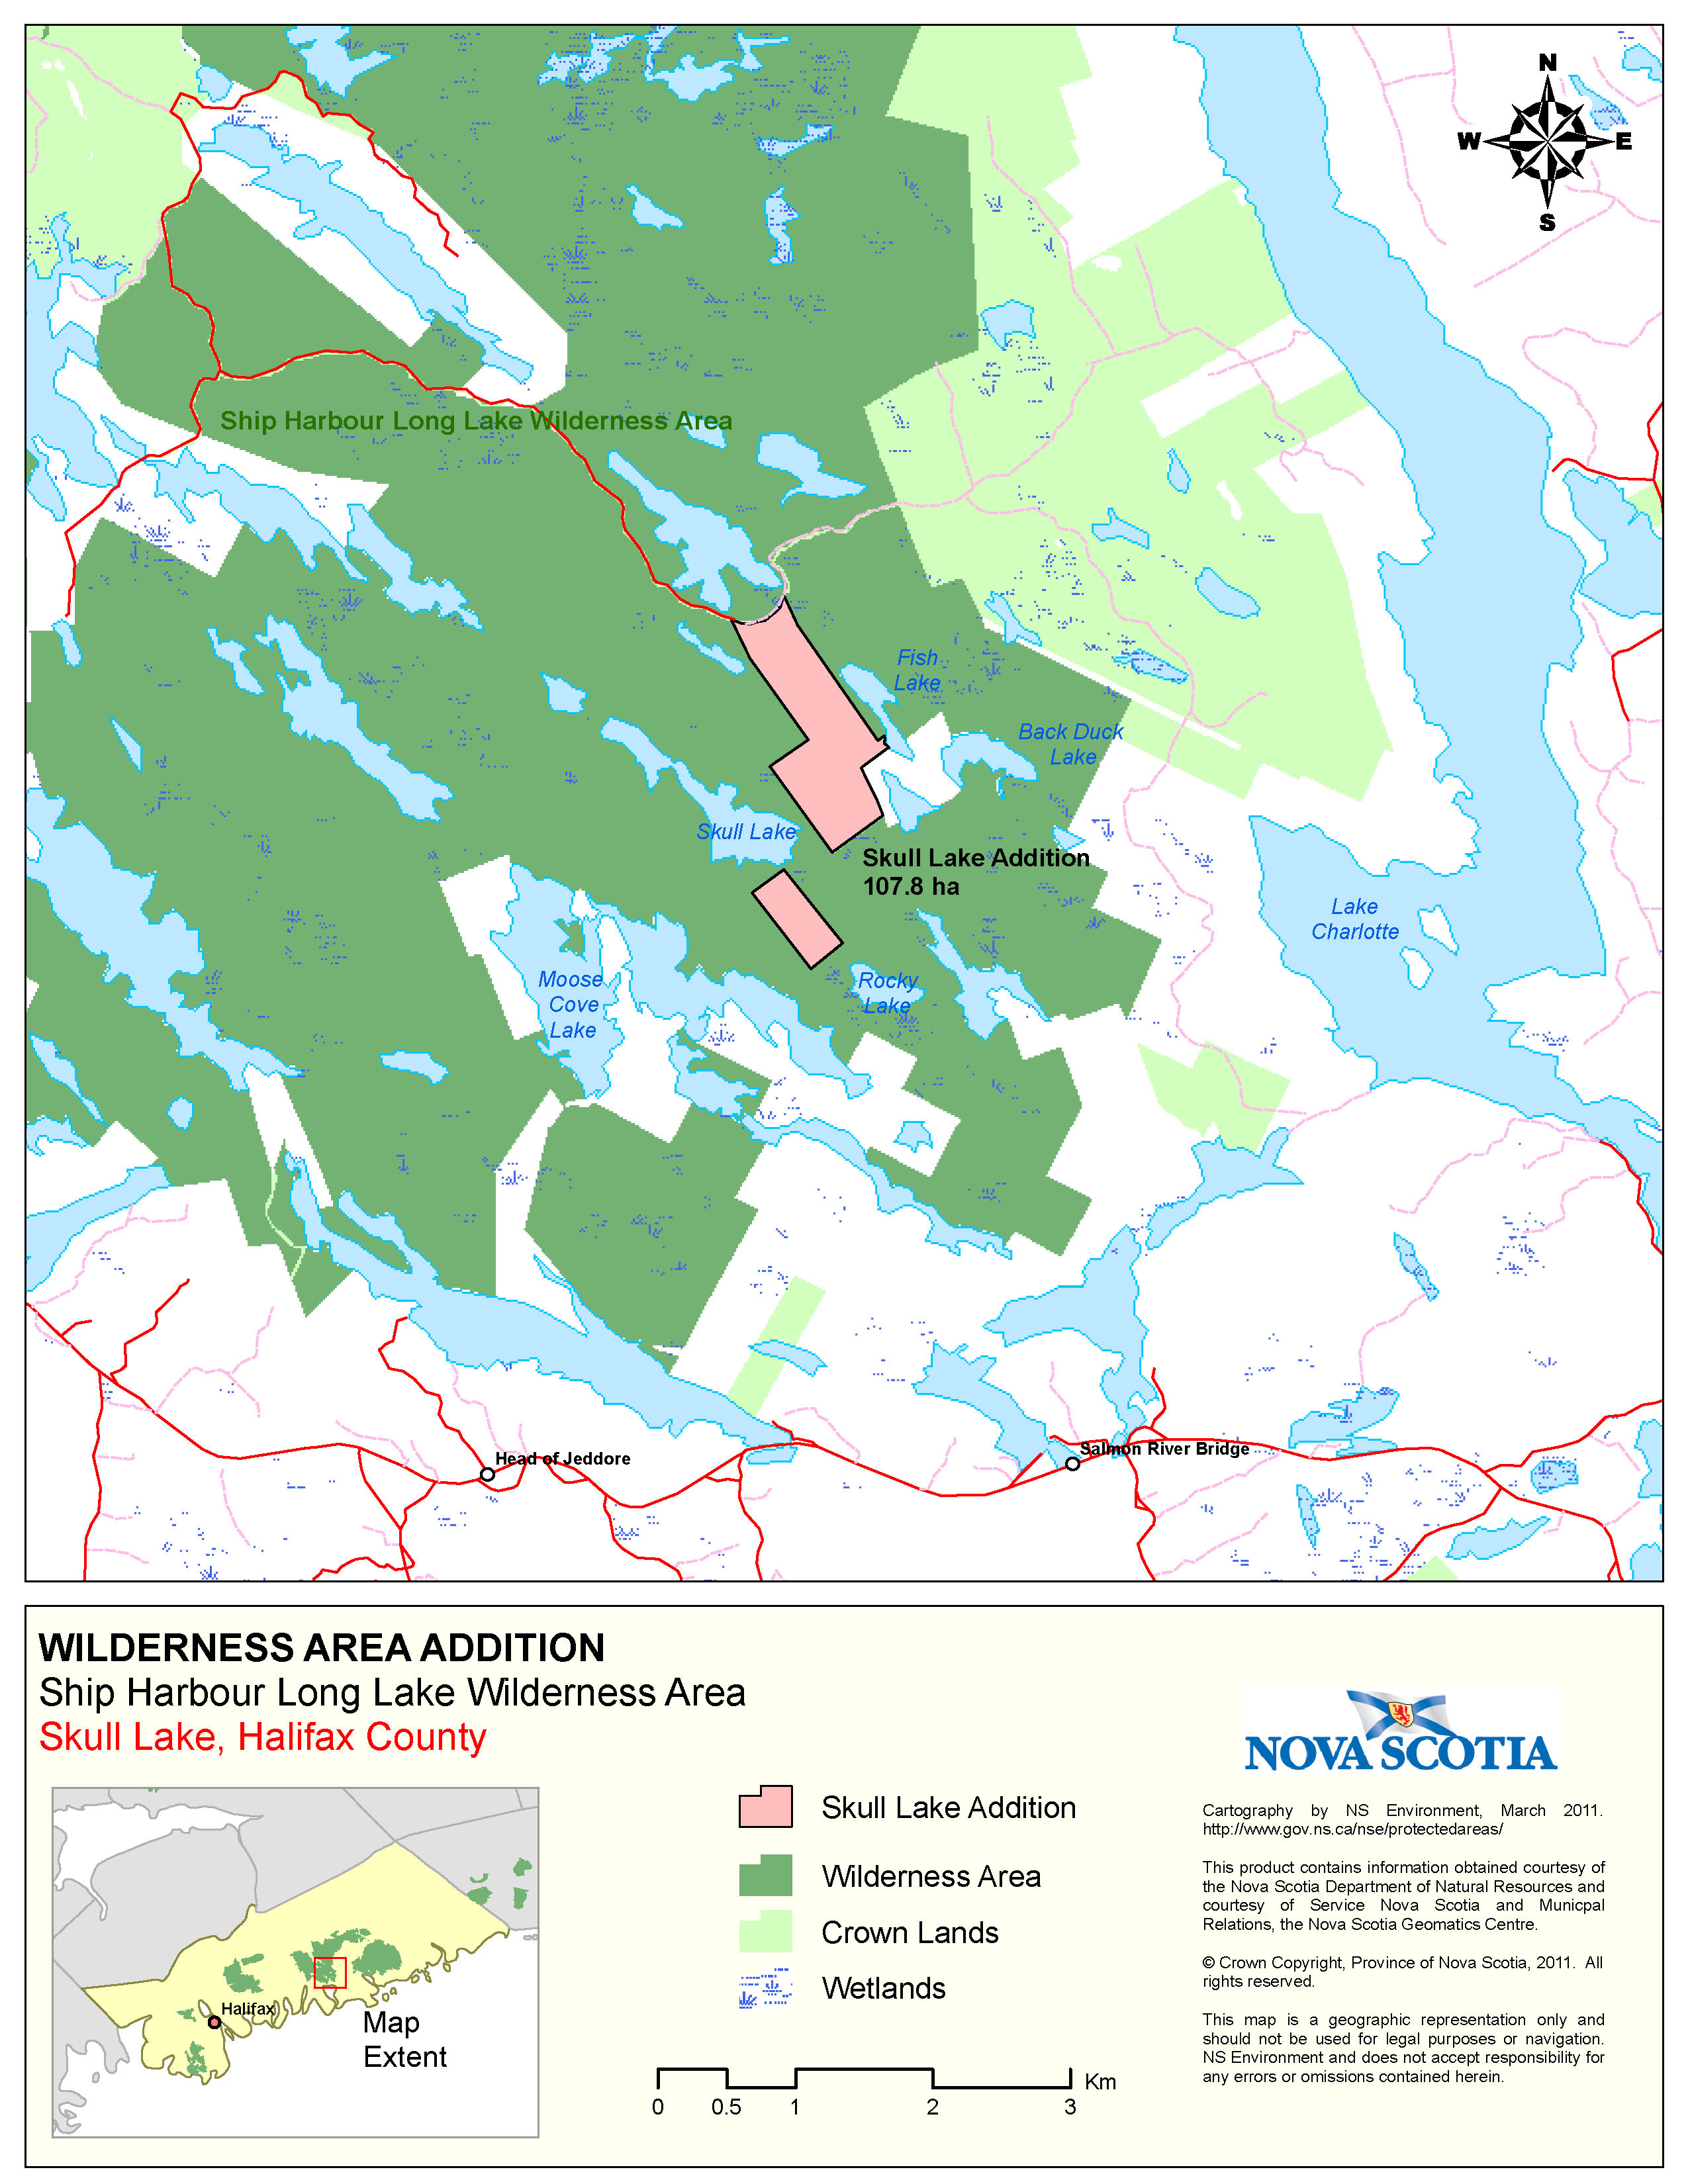 Graphic showing map of Boundaries of Crown Land at  Skull Lake, Halifax County Addition to Ship Harbour Long Lake Wilderness Area